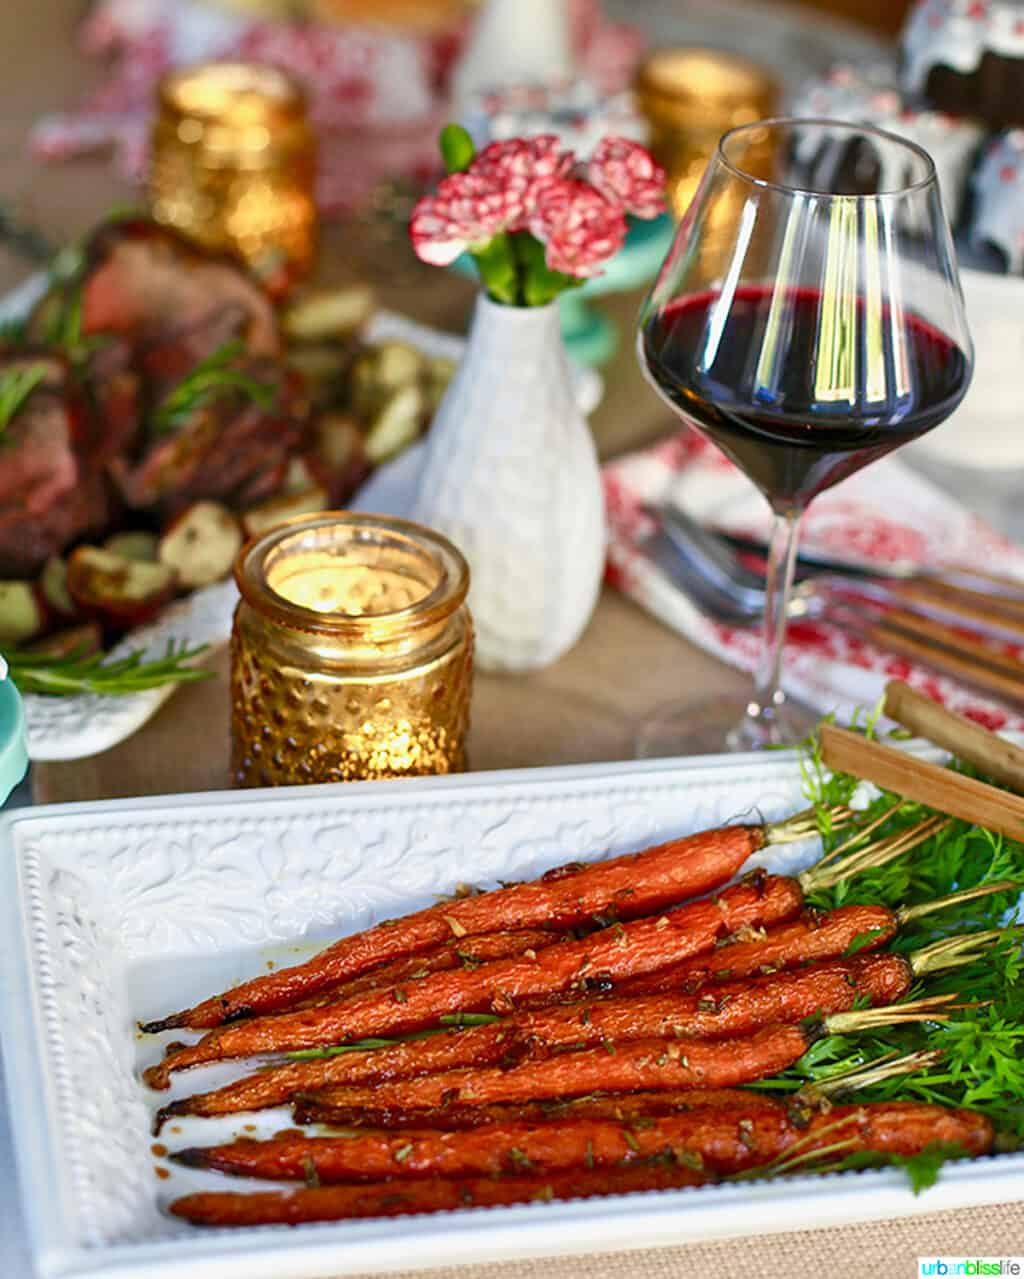 plate of garlic rosemary roasted glazed carrots on holiday table with wine